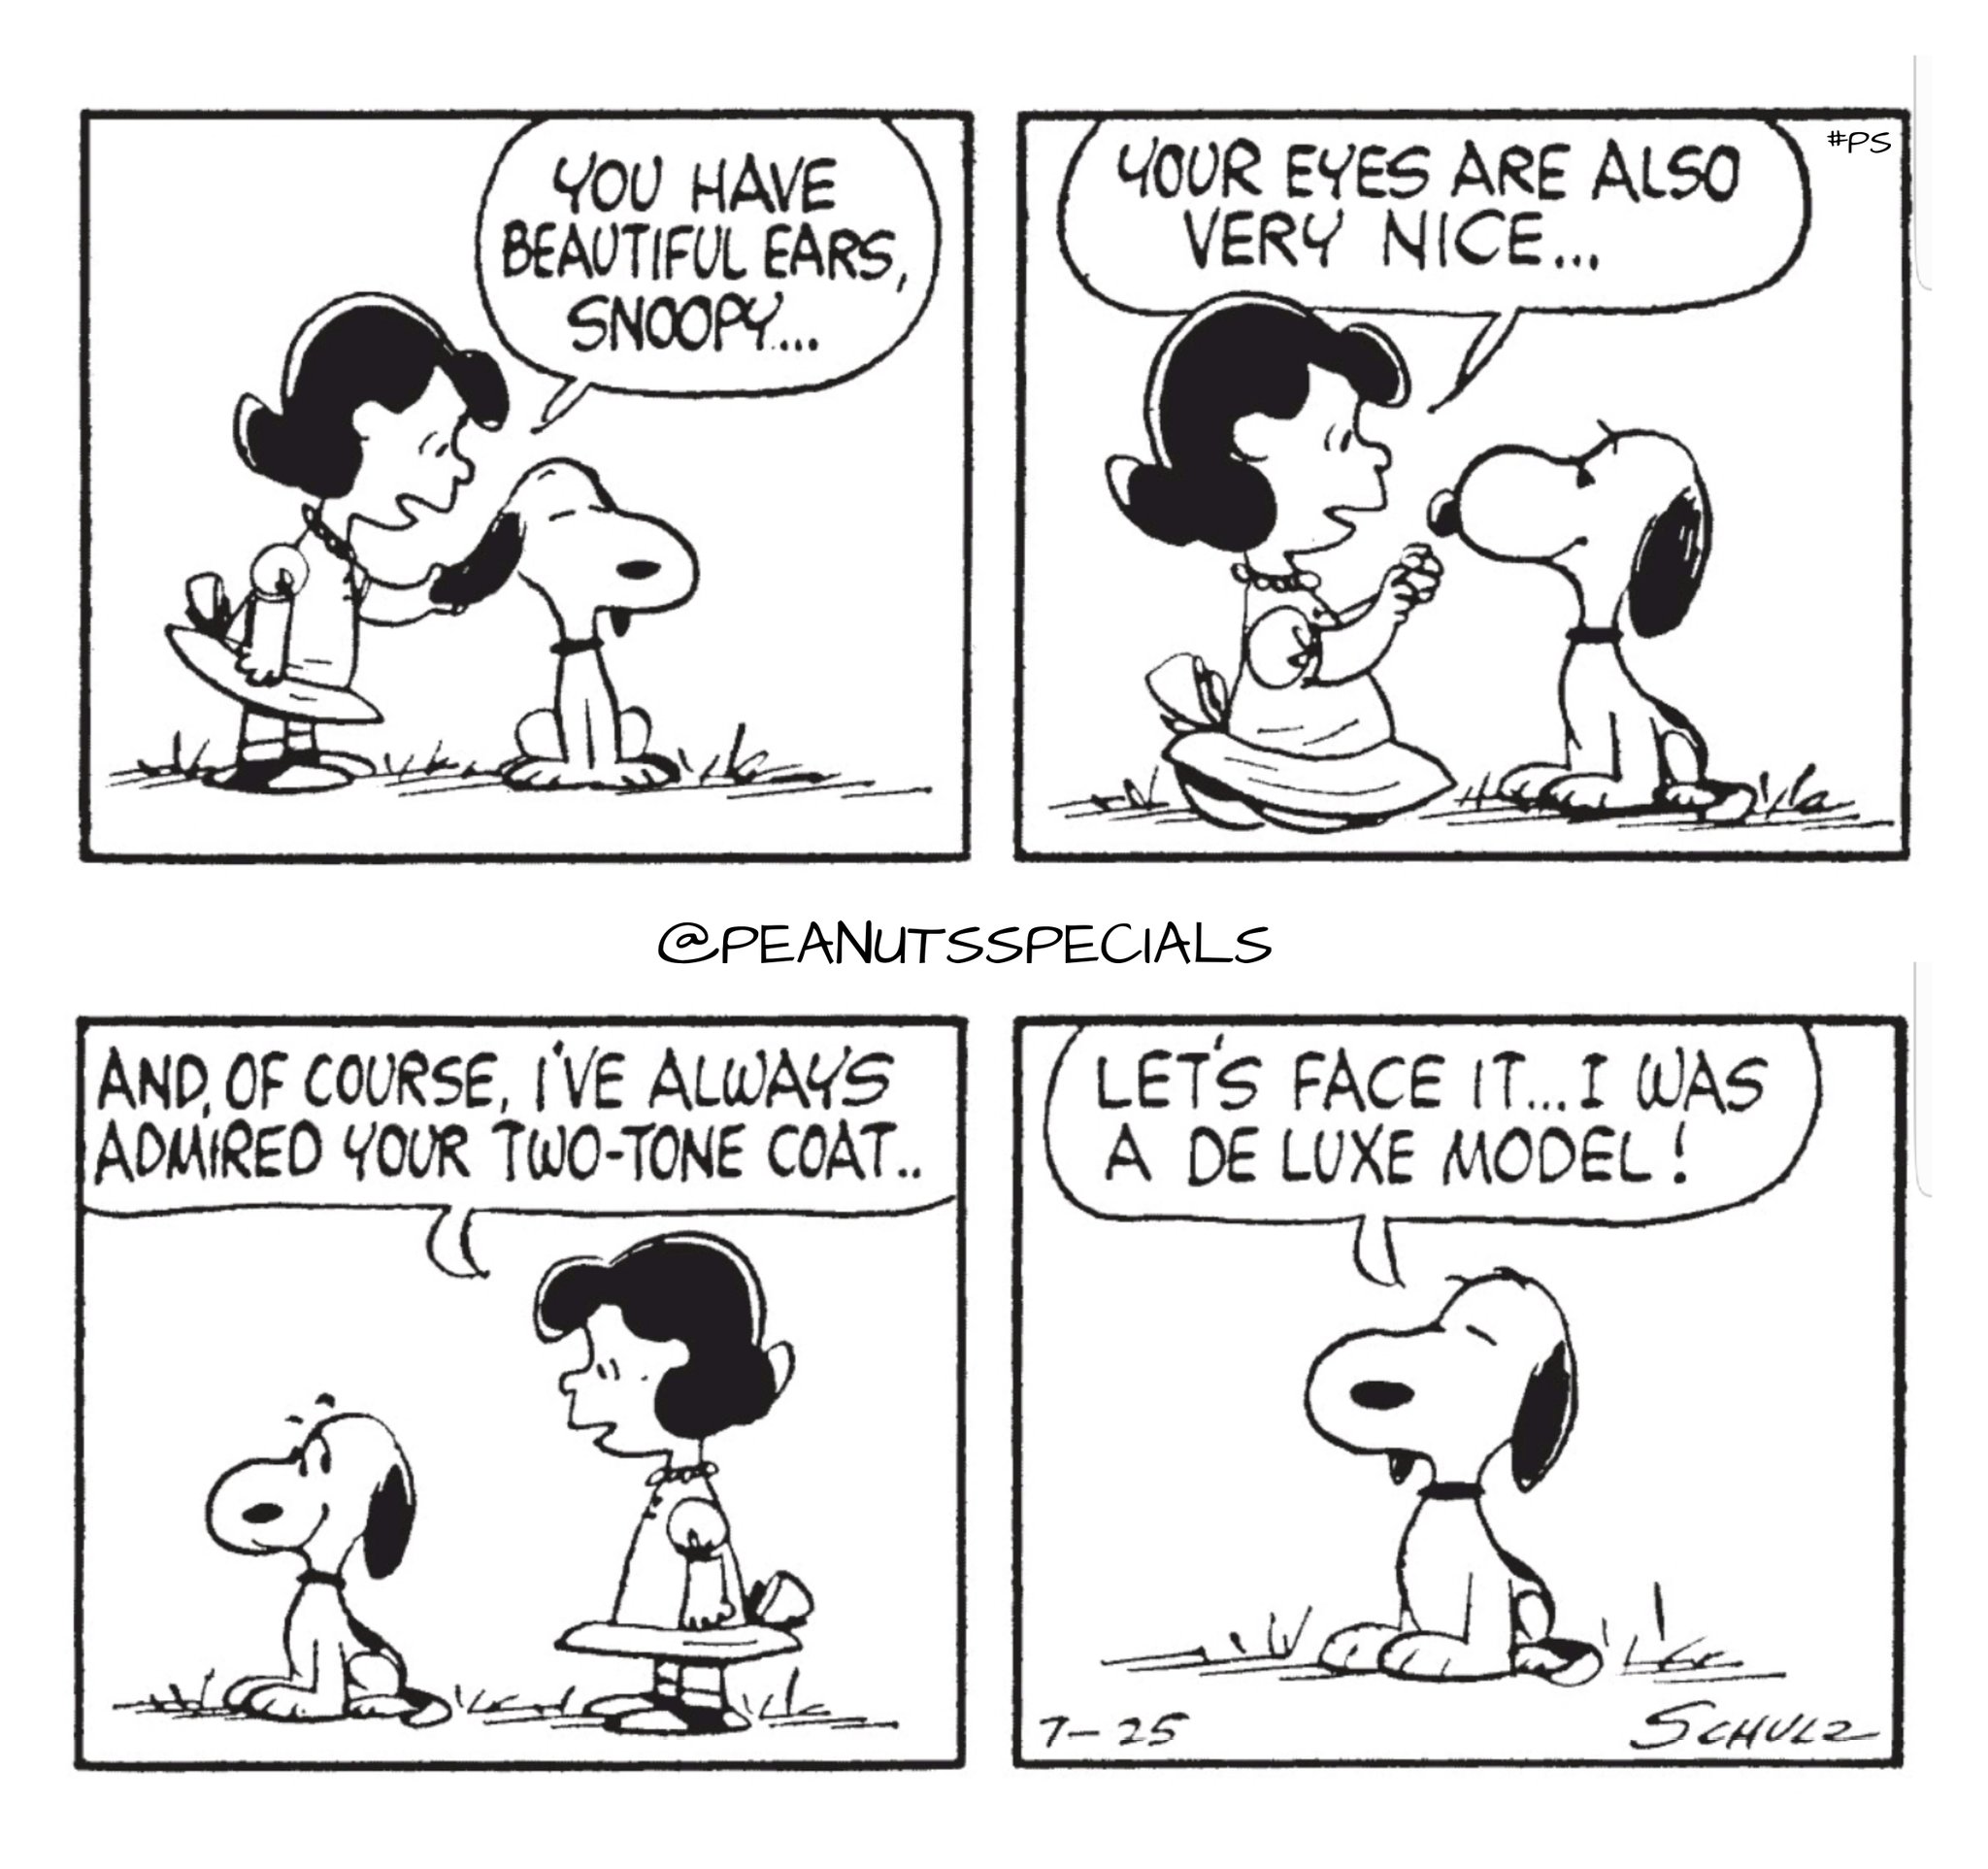 Bloody Specifiek Adviseren Peanuts Specials on Twitter: "First Appearance: July 25, 1963 #snoopy  #lucyvanpelt #have #beautiful #ears #eyes #nice #ofcourse #always #admired  #twotone #coat #letsfaceit #deluxemodel #peanutssaturday #peanutsstrong  #peanutshome #staysafe #schulz #ps ...